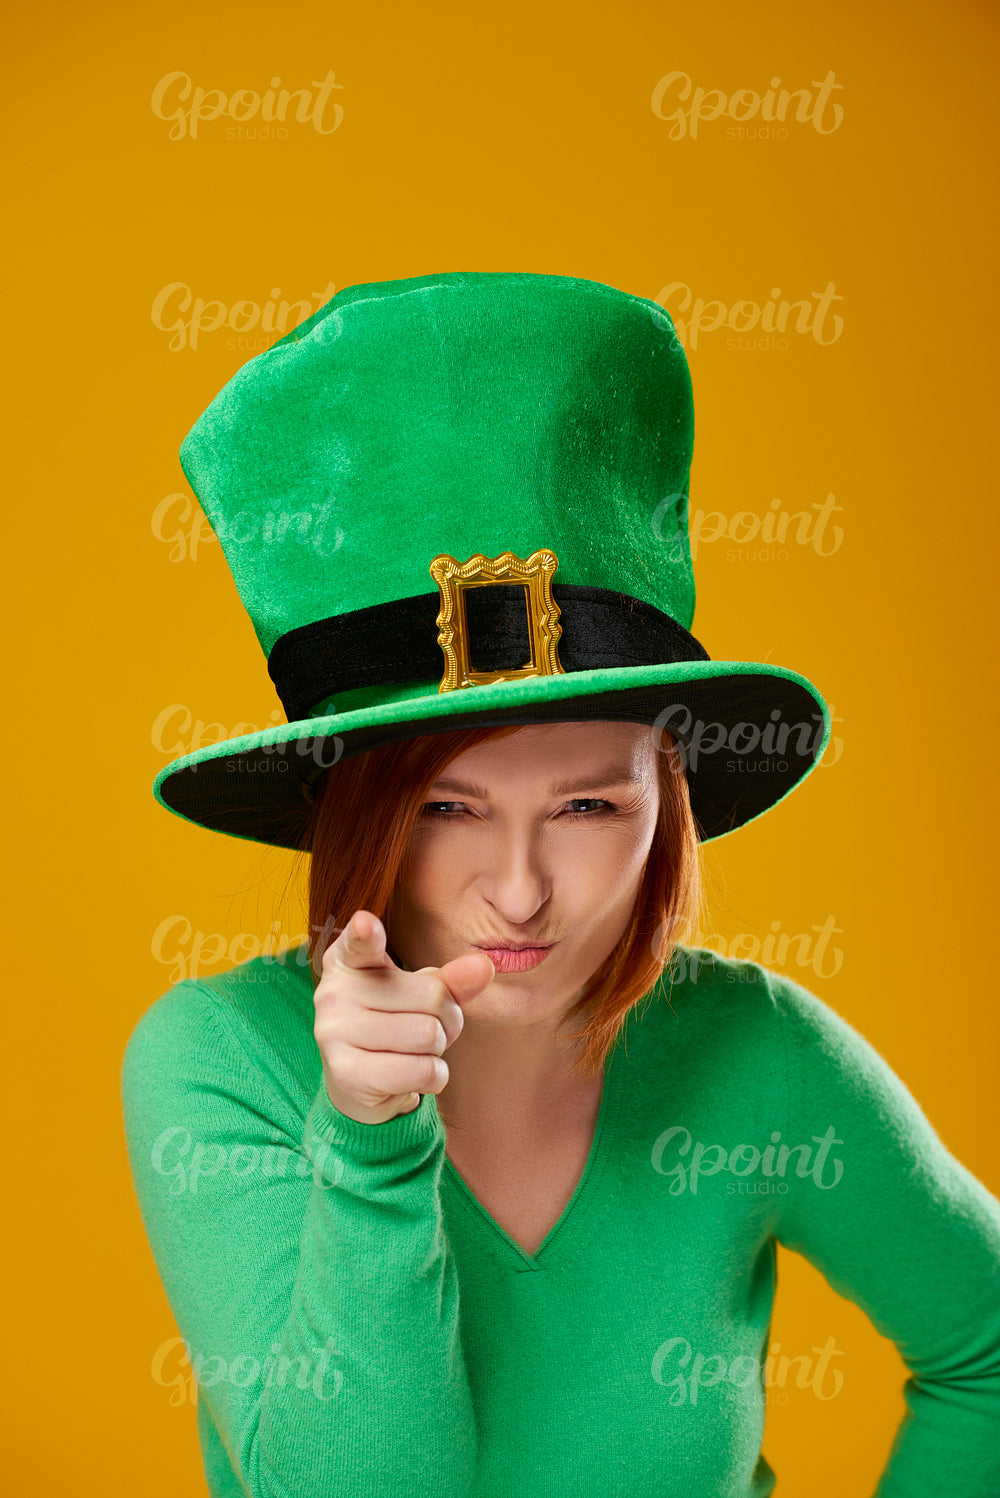 Portrait of playful woman with leprechaun's hat pointing at camera